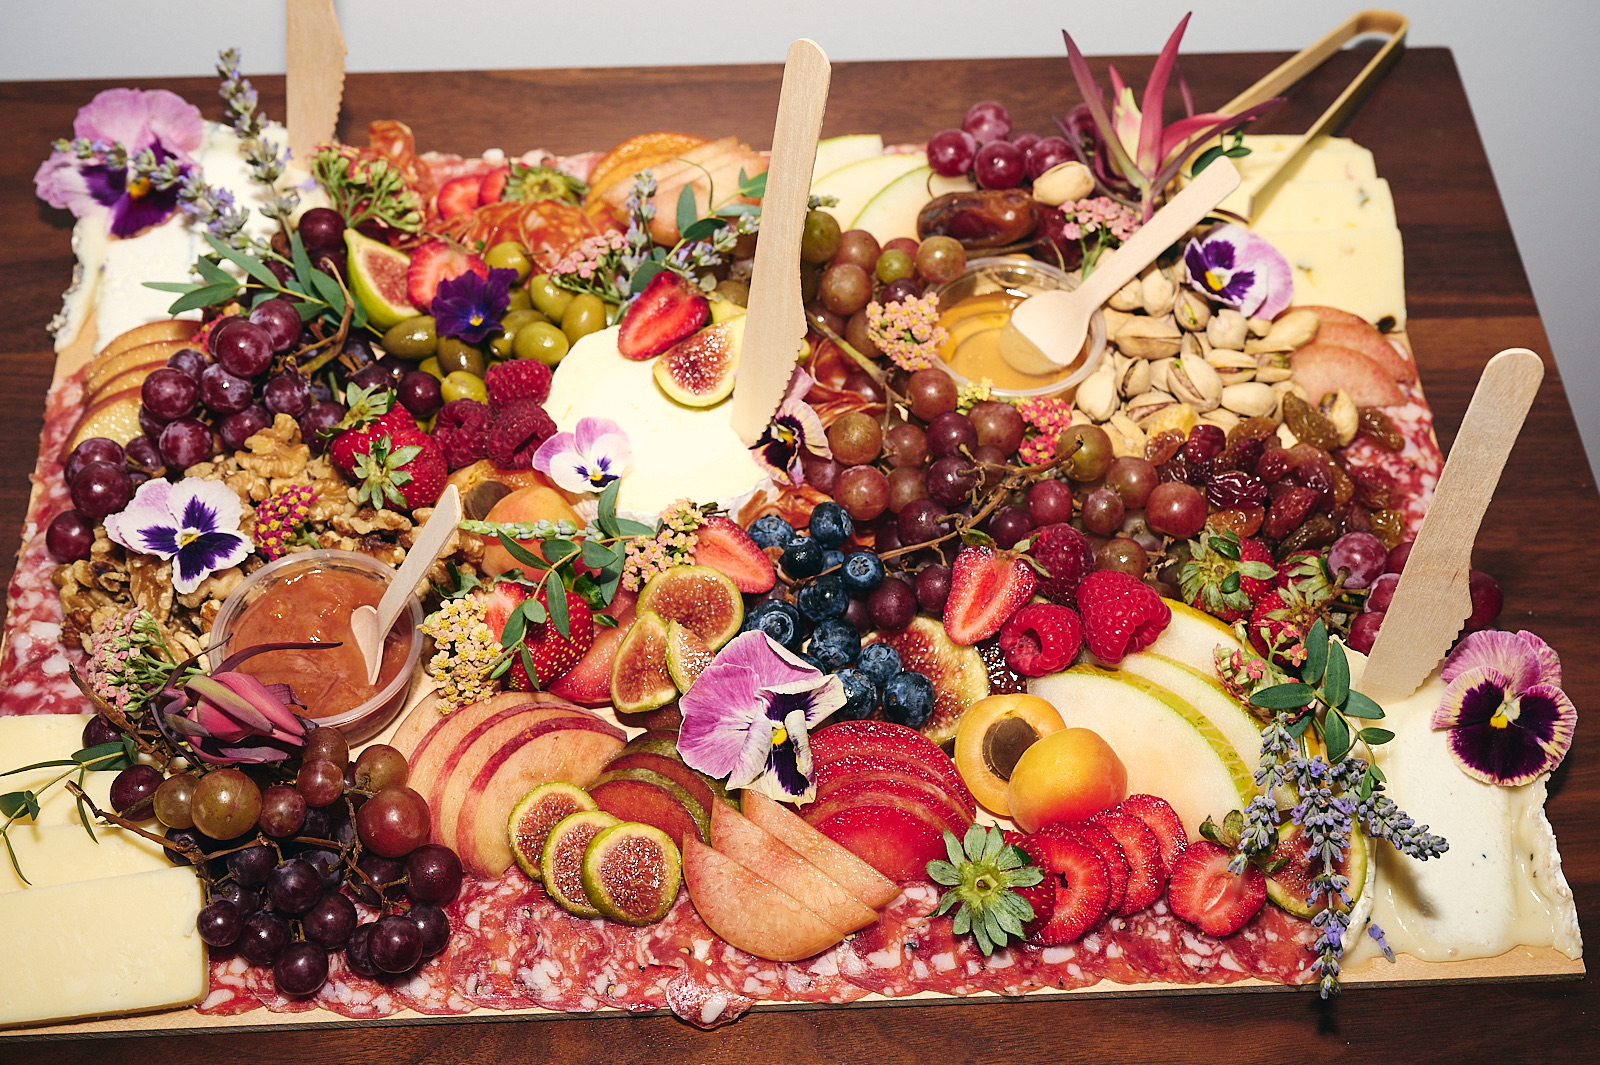 Assorted fruits, cheeses, and dips arranged on a tray